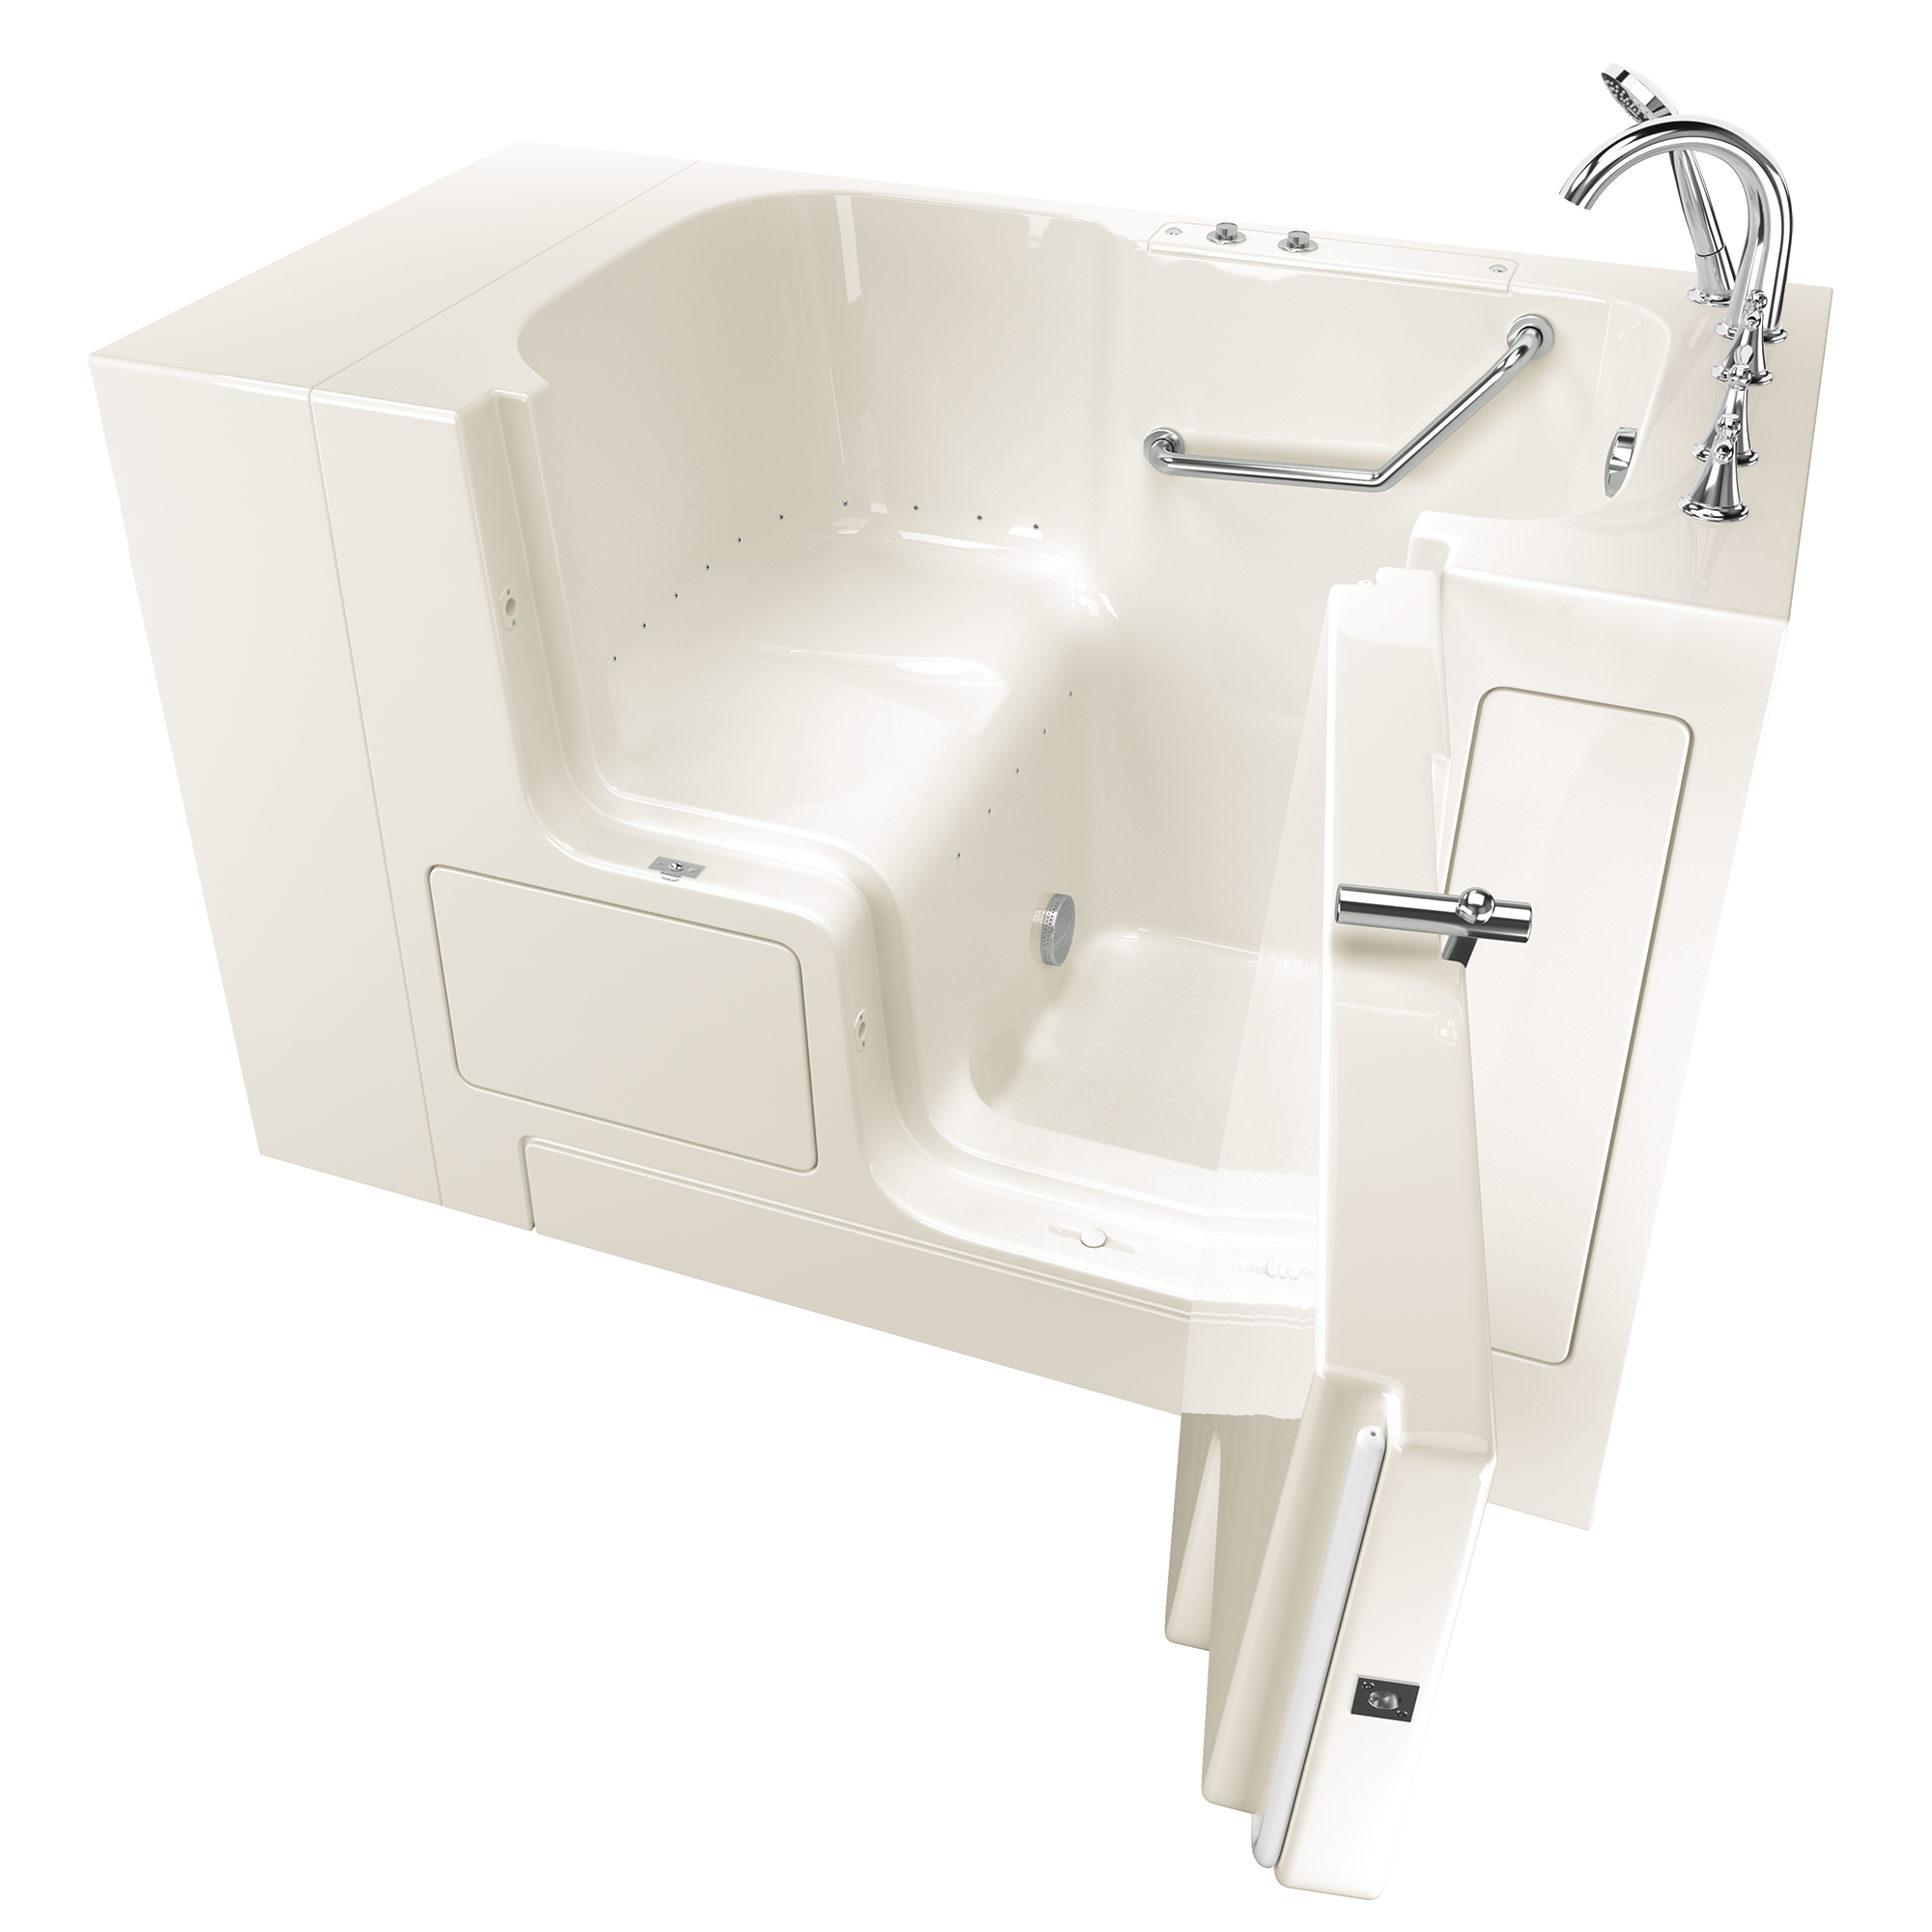 Gelcoat Value Series 32 x 52 -Inch Walk-in Tub With Air Spa System - Right-Hand Drain With Faucet